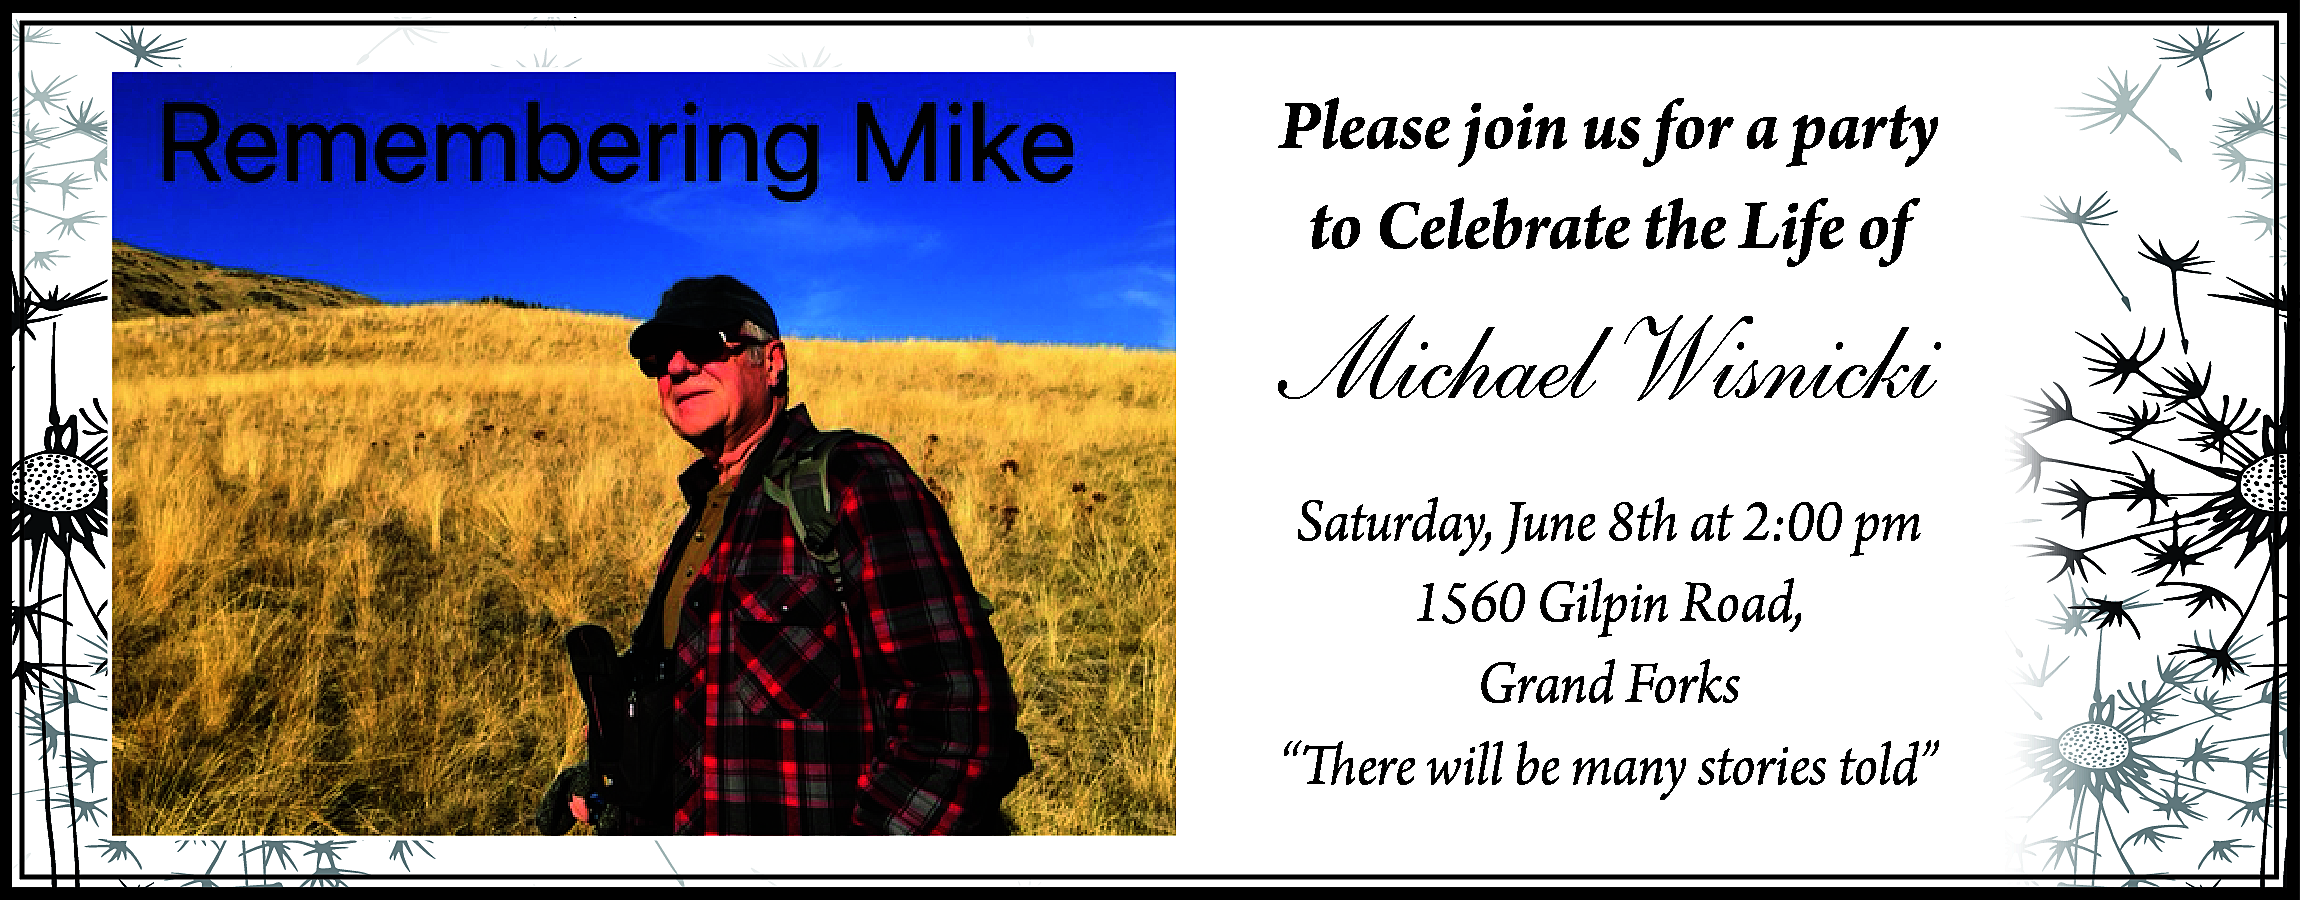 Please join us for a  Please join us for a party  to Celebrate the Life of    Michael Wisnicki  Saturday, June 8th at 2:00 pm  1560 Gilpin Road,  Grand Forks  “There will be many stories told”    